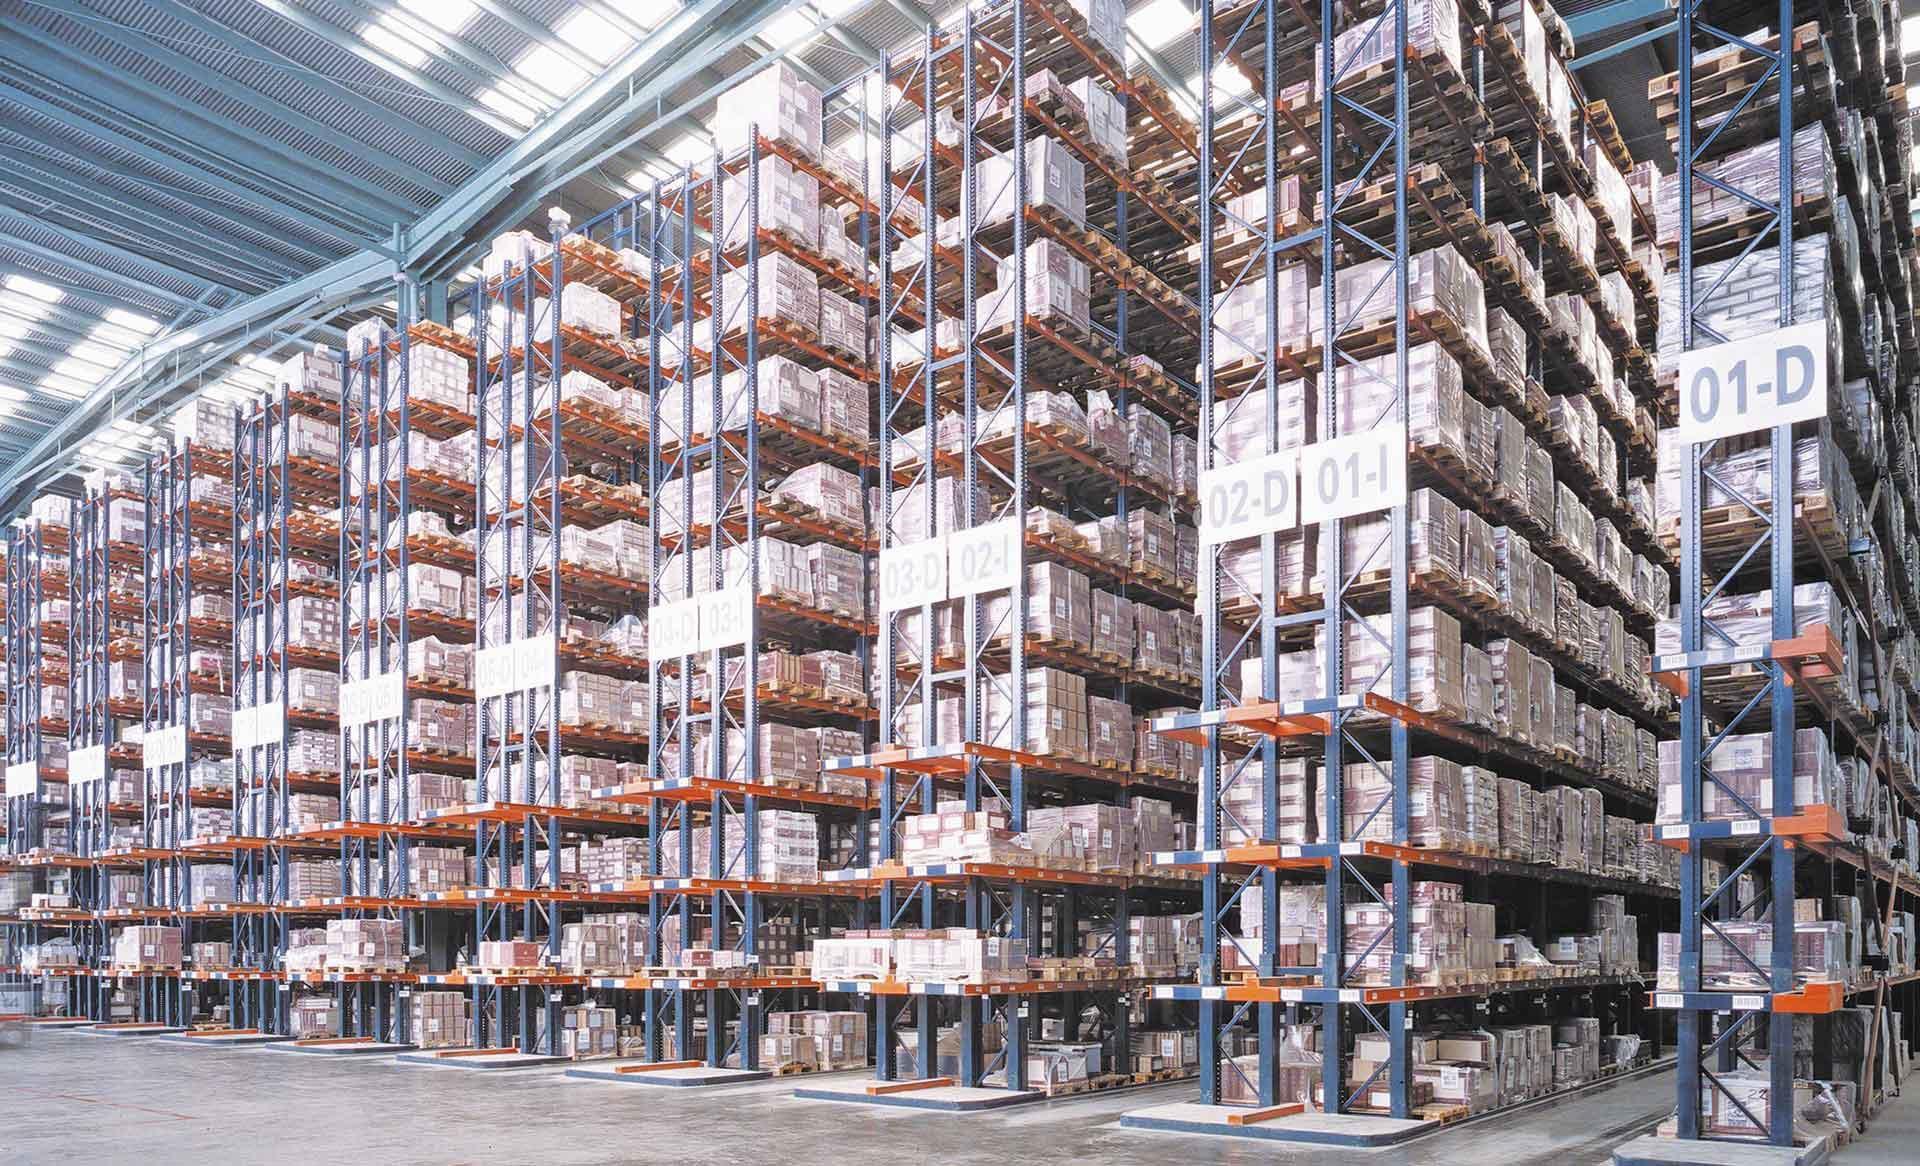 View of a warehouse with pallet racking